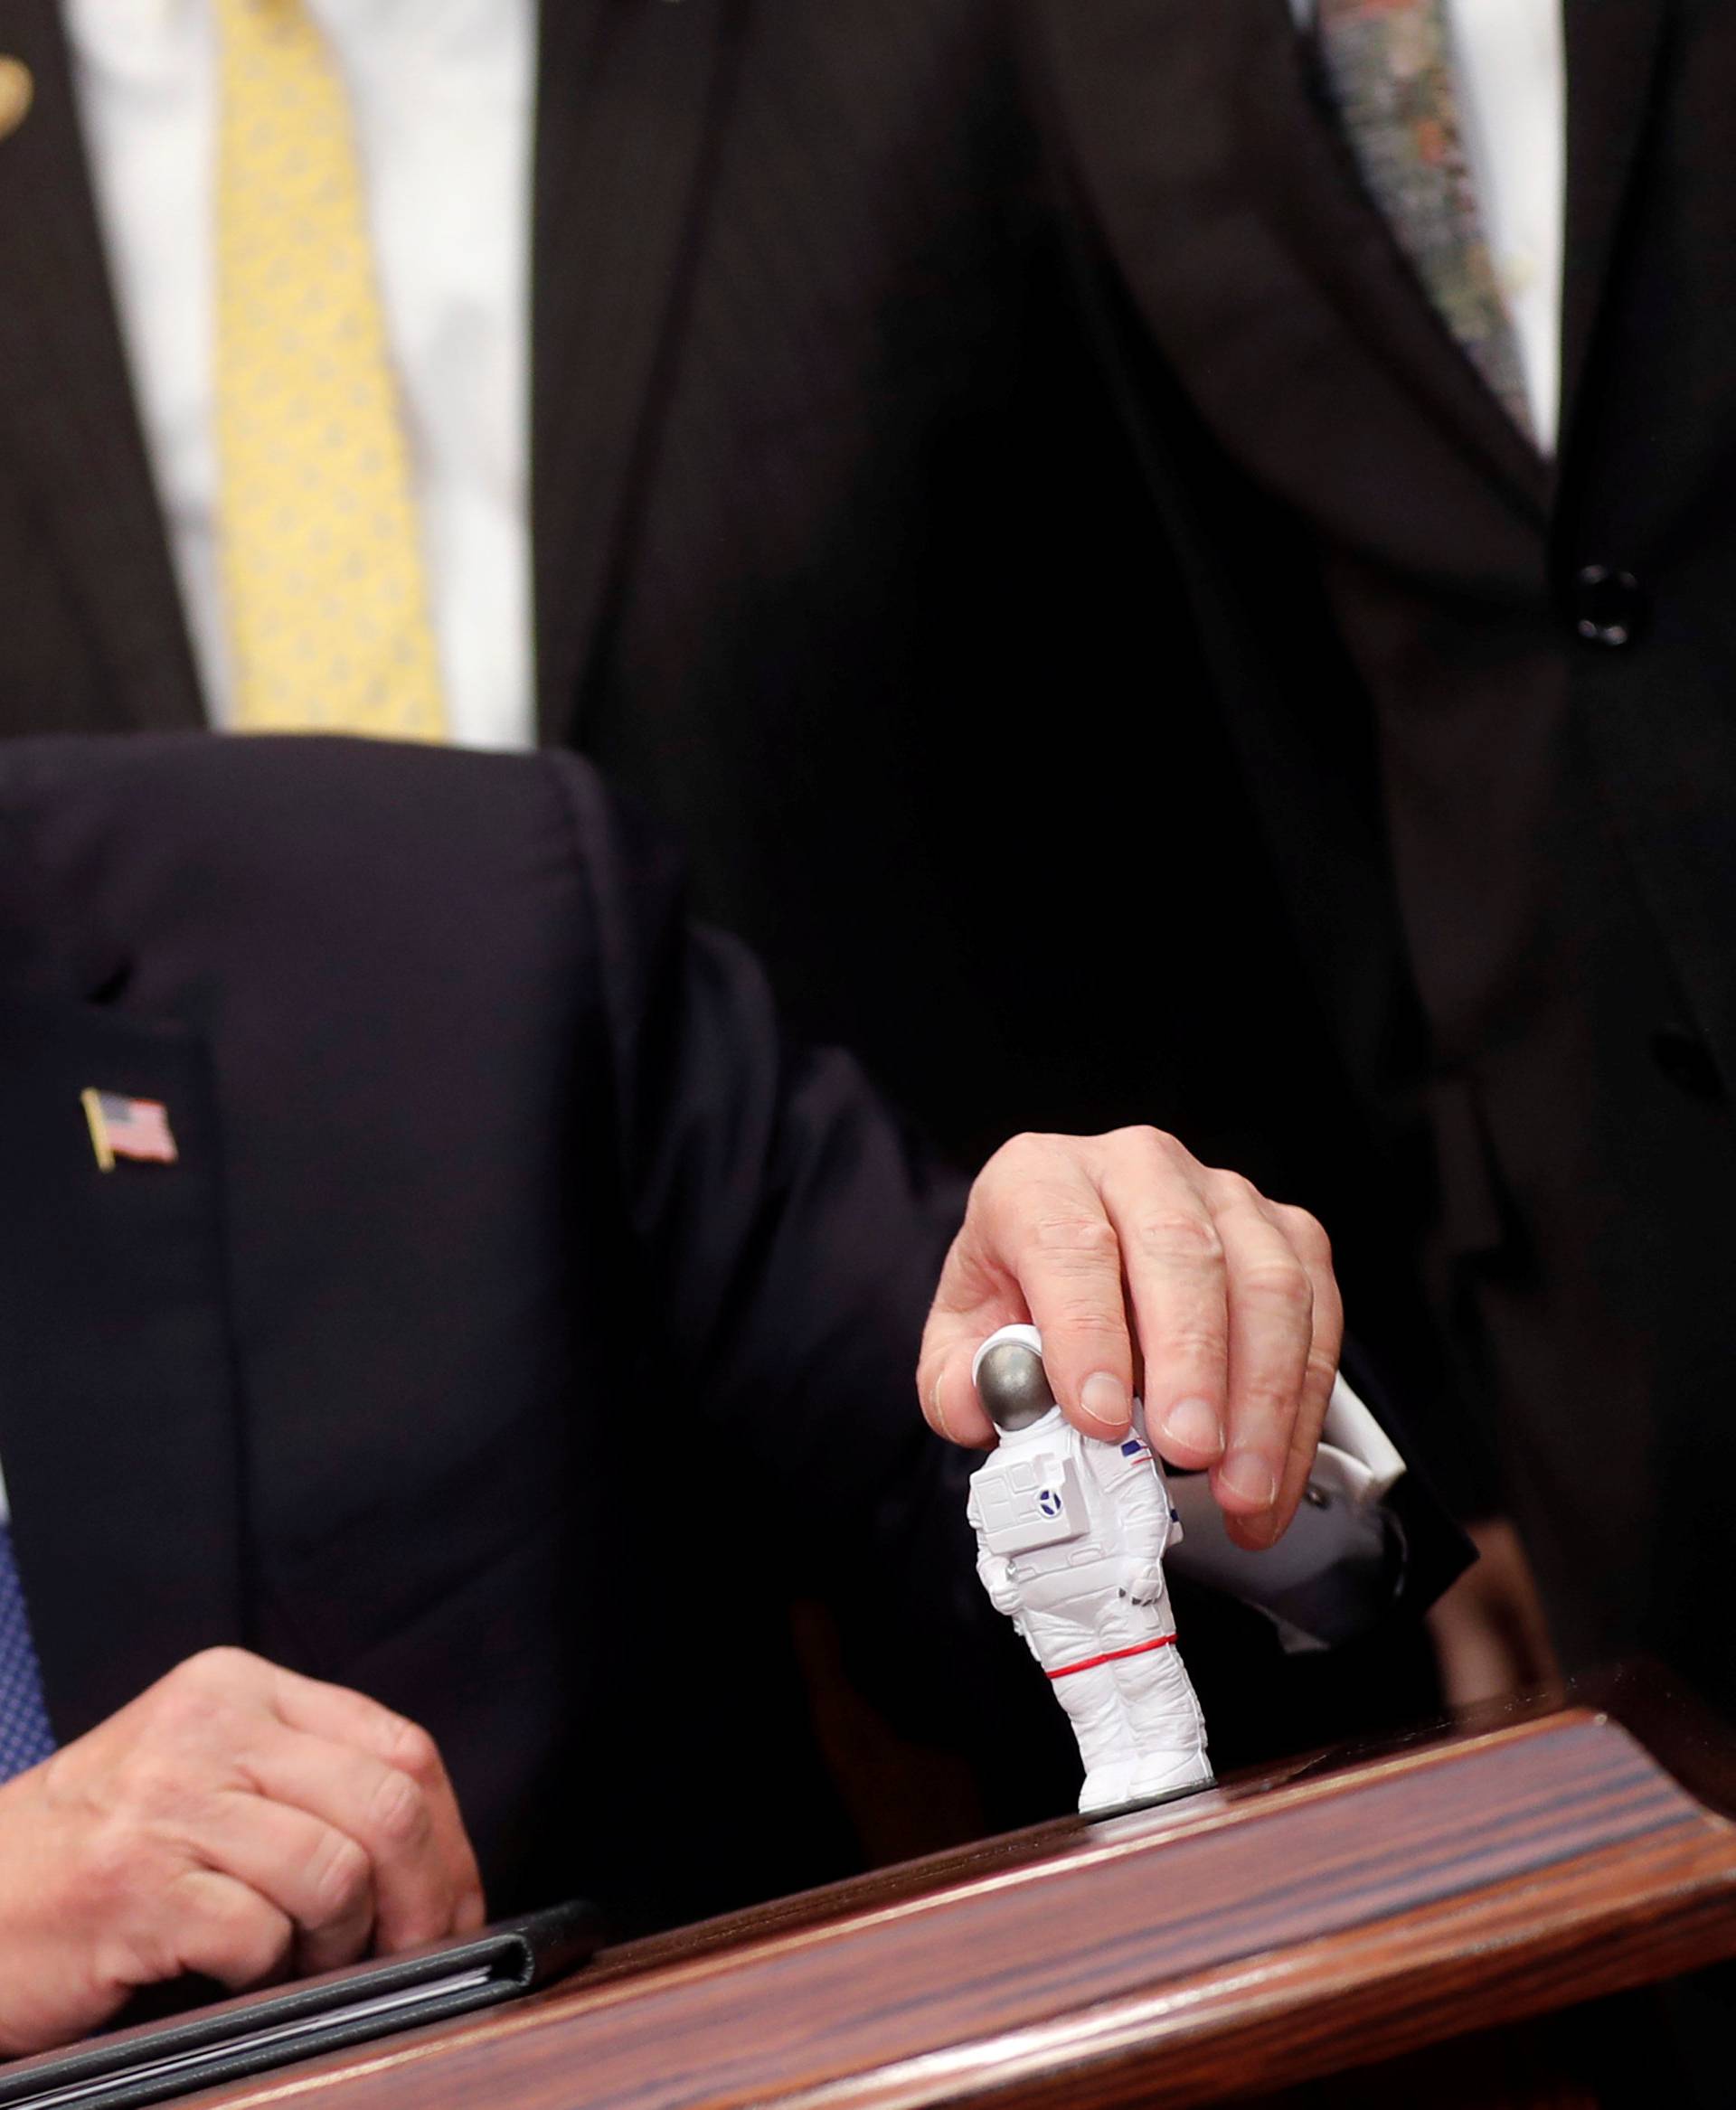 U.S. President Donald Trump holds a space astronaut toy as he participates in a signing ceremony for Space Policy Directive at the White House in Washington D.C.